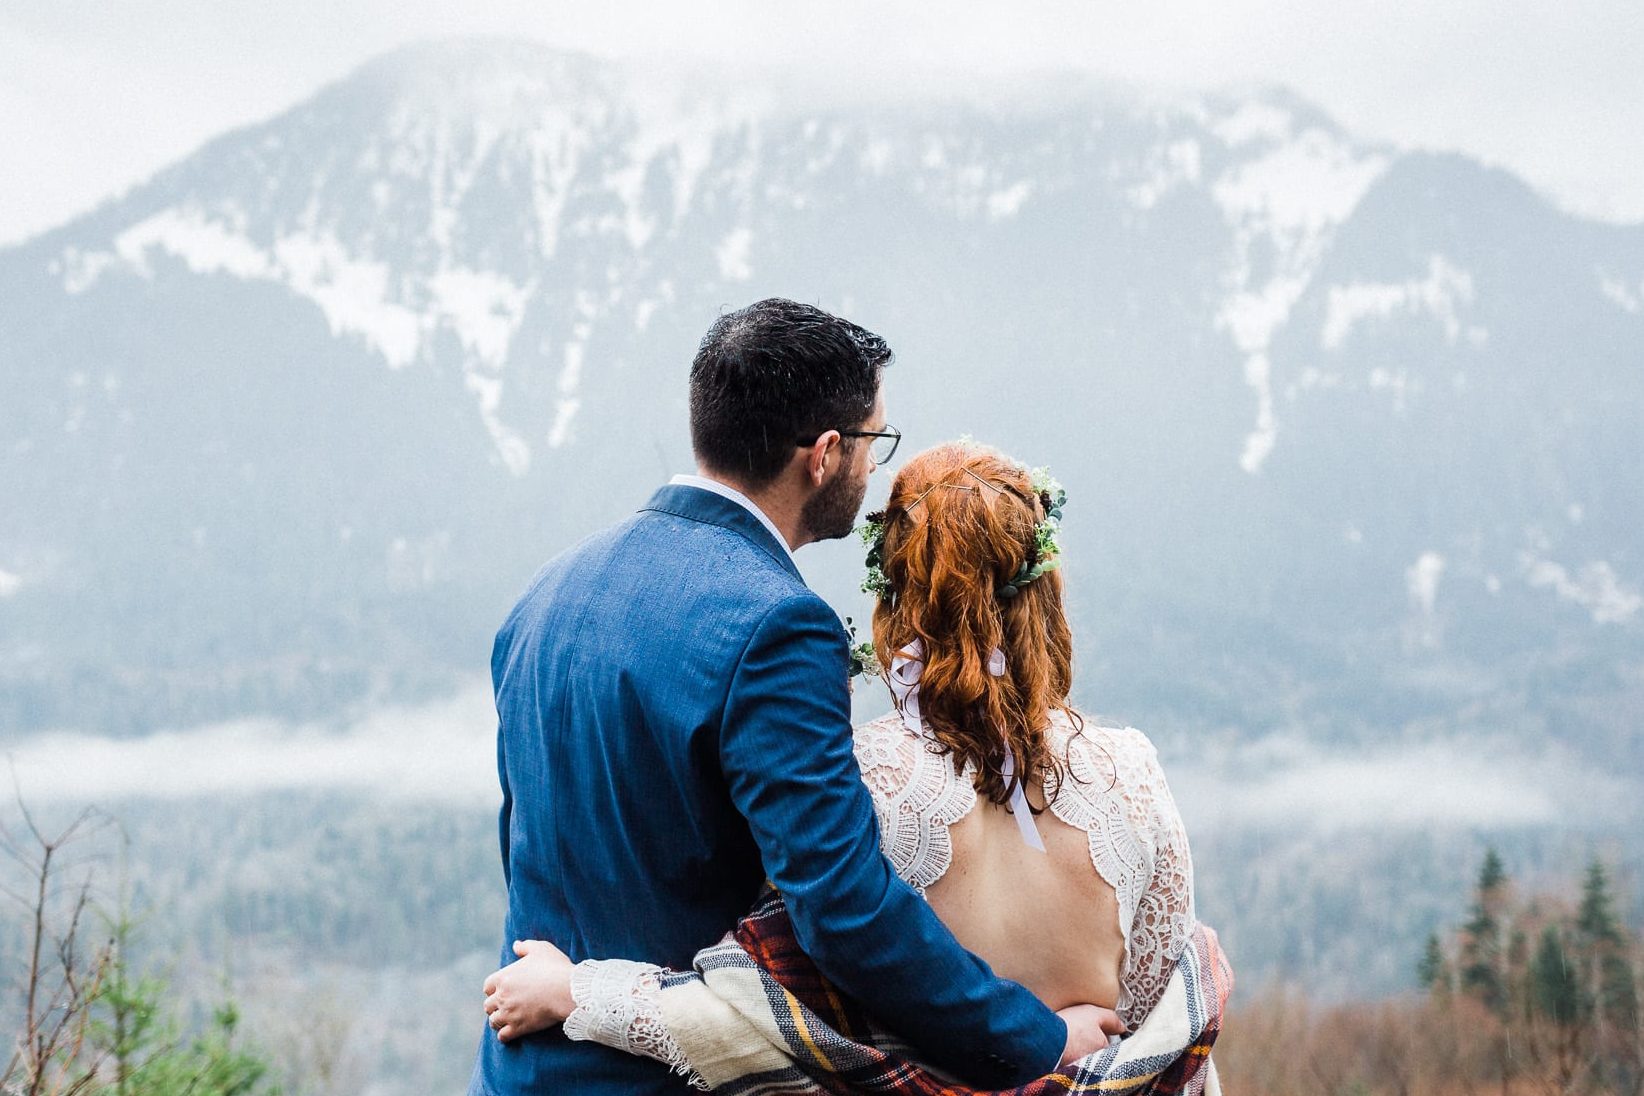 couple dressed in wedding attire looking at the view of mountains in front of them.